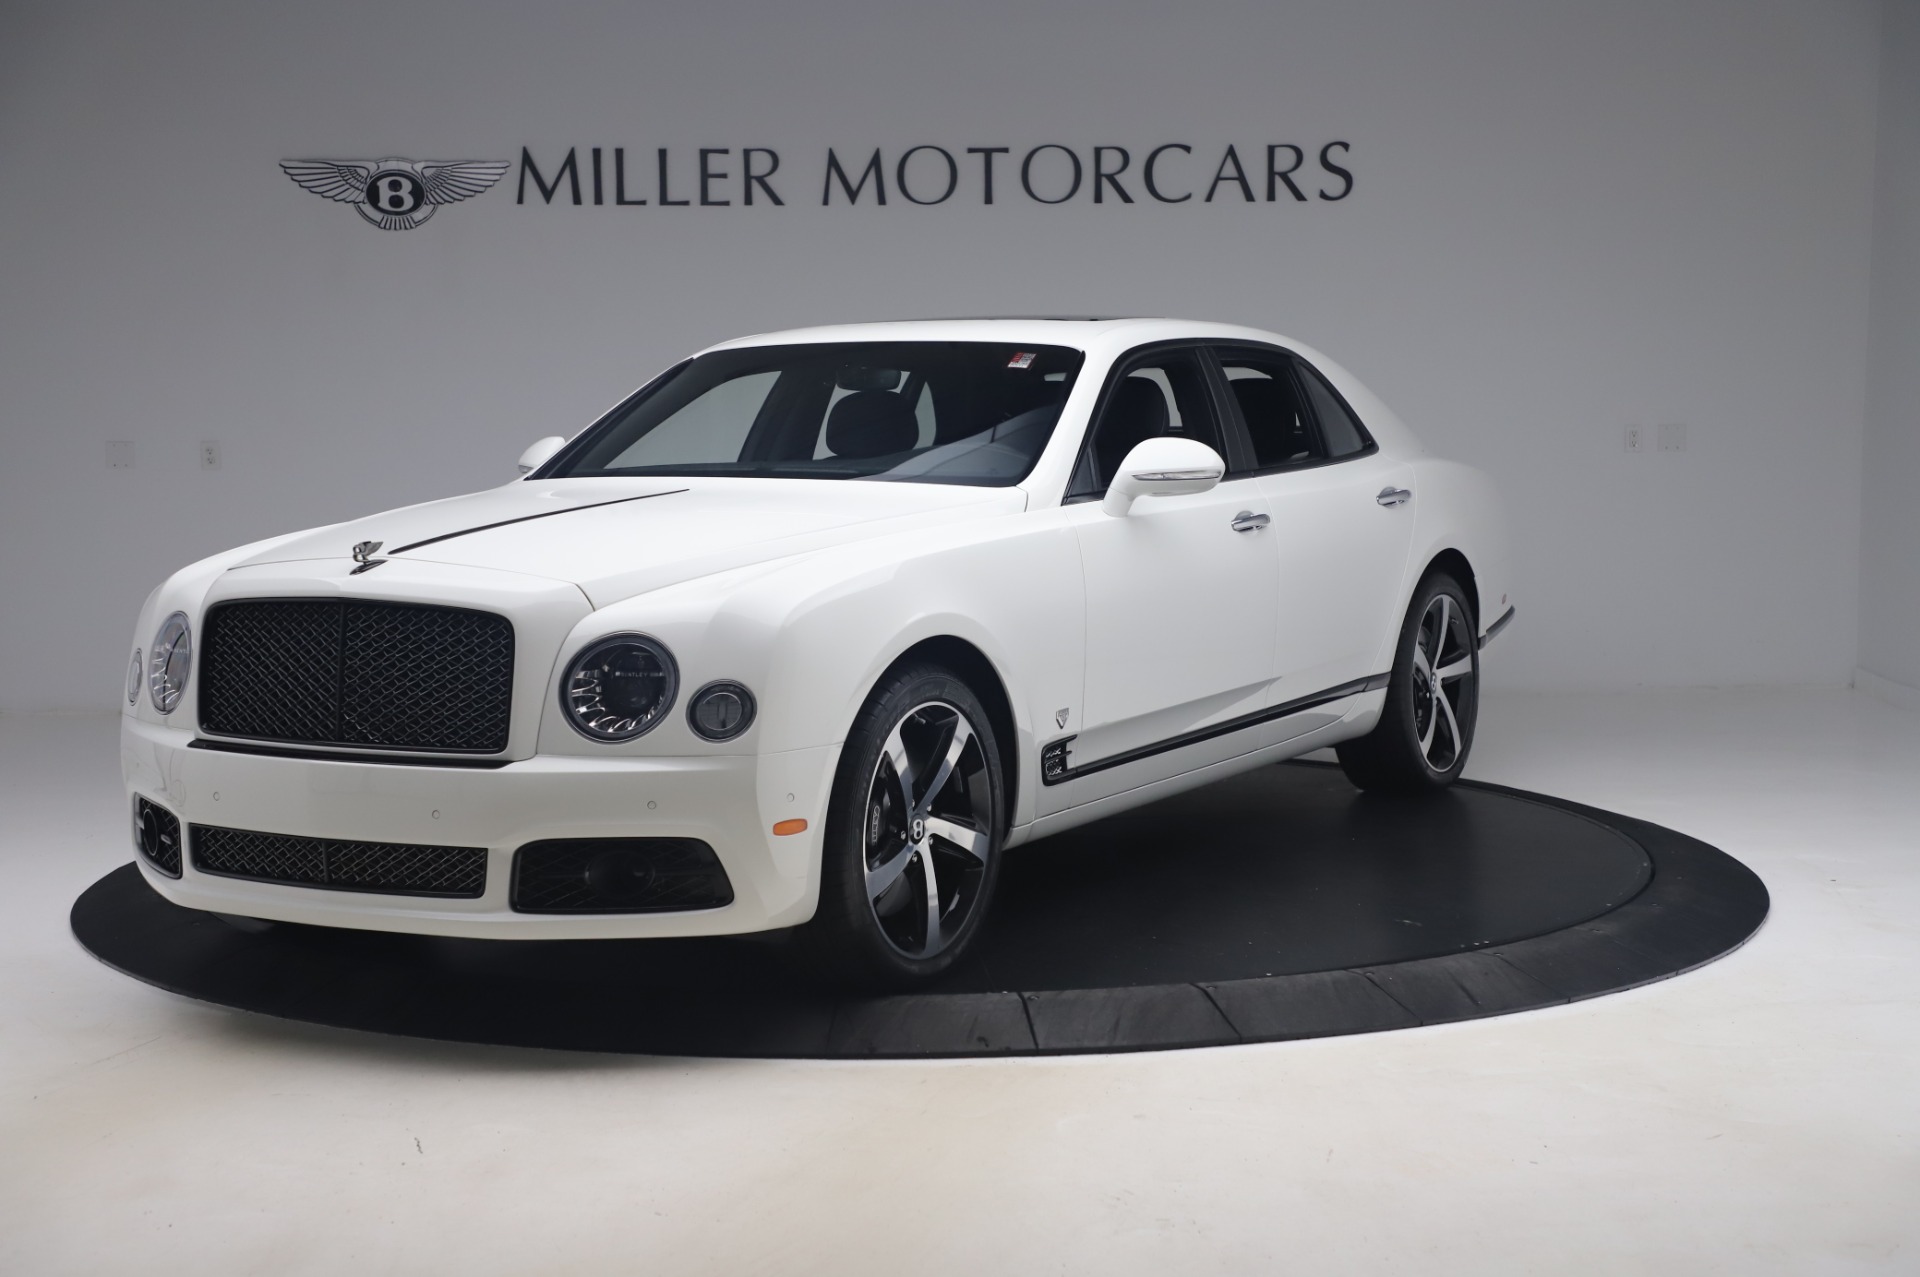 New-2020-Bentley-Mulsanne-675-Edition-by-Mulliner